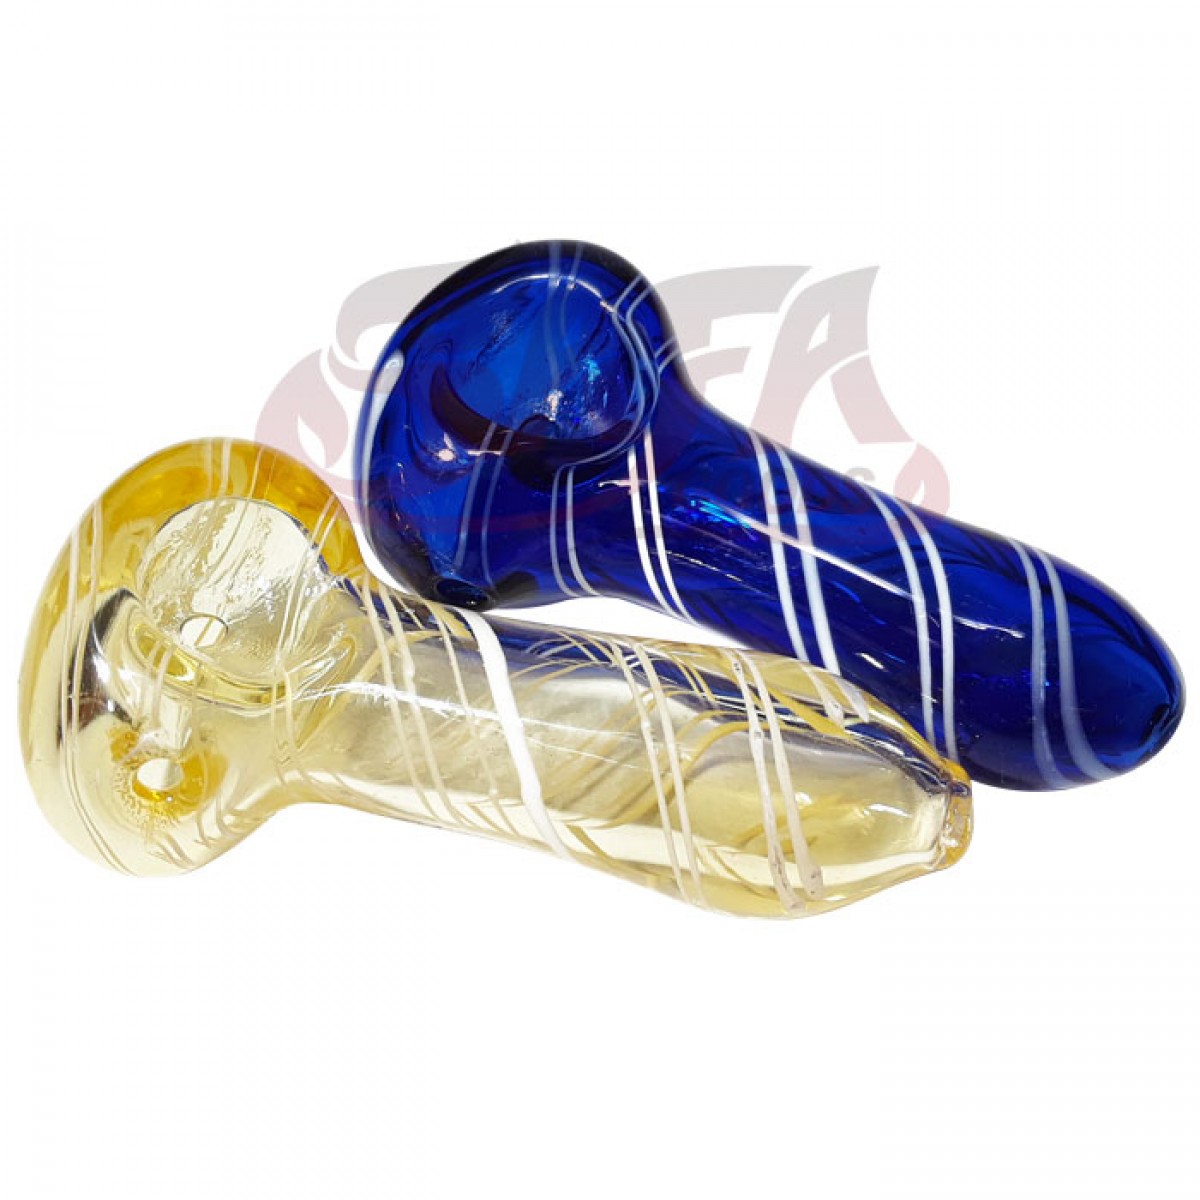 2.5 Inch Glass CT Hand Pipes